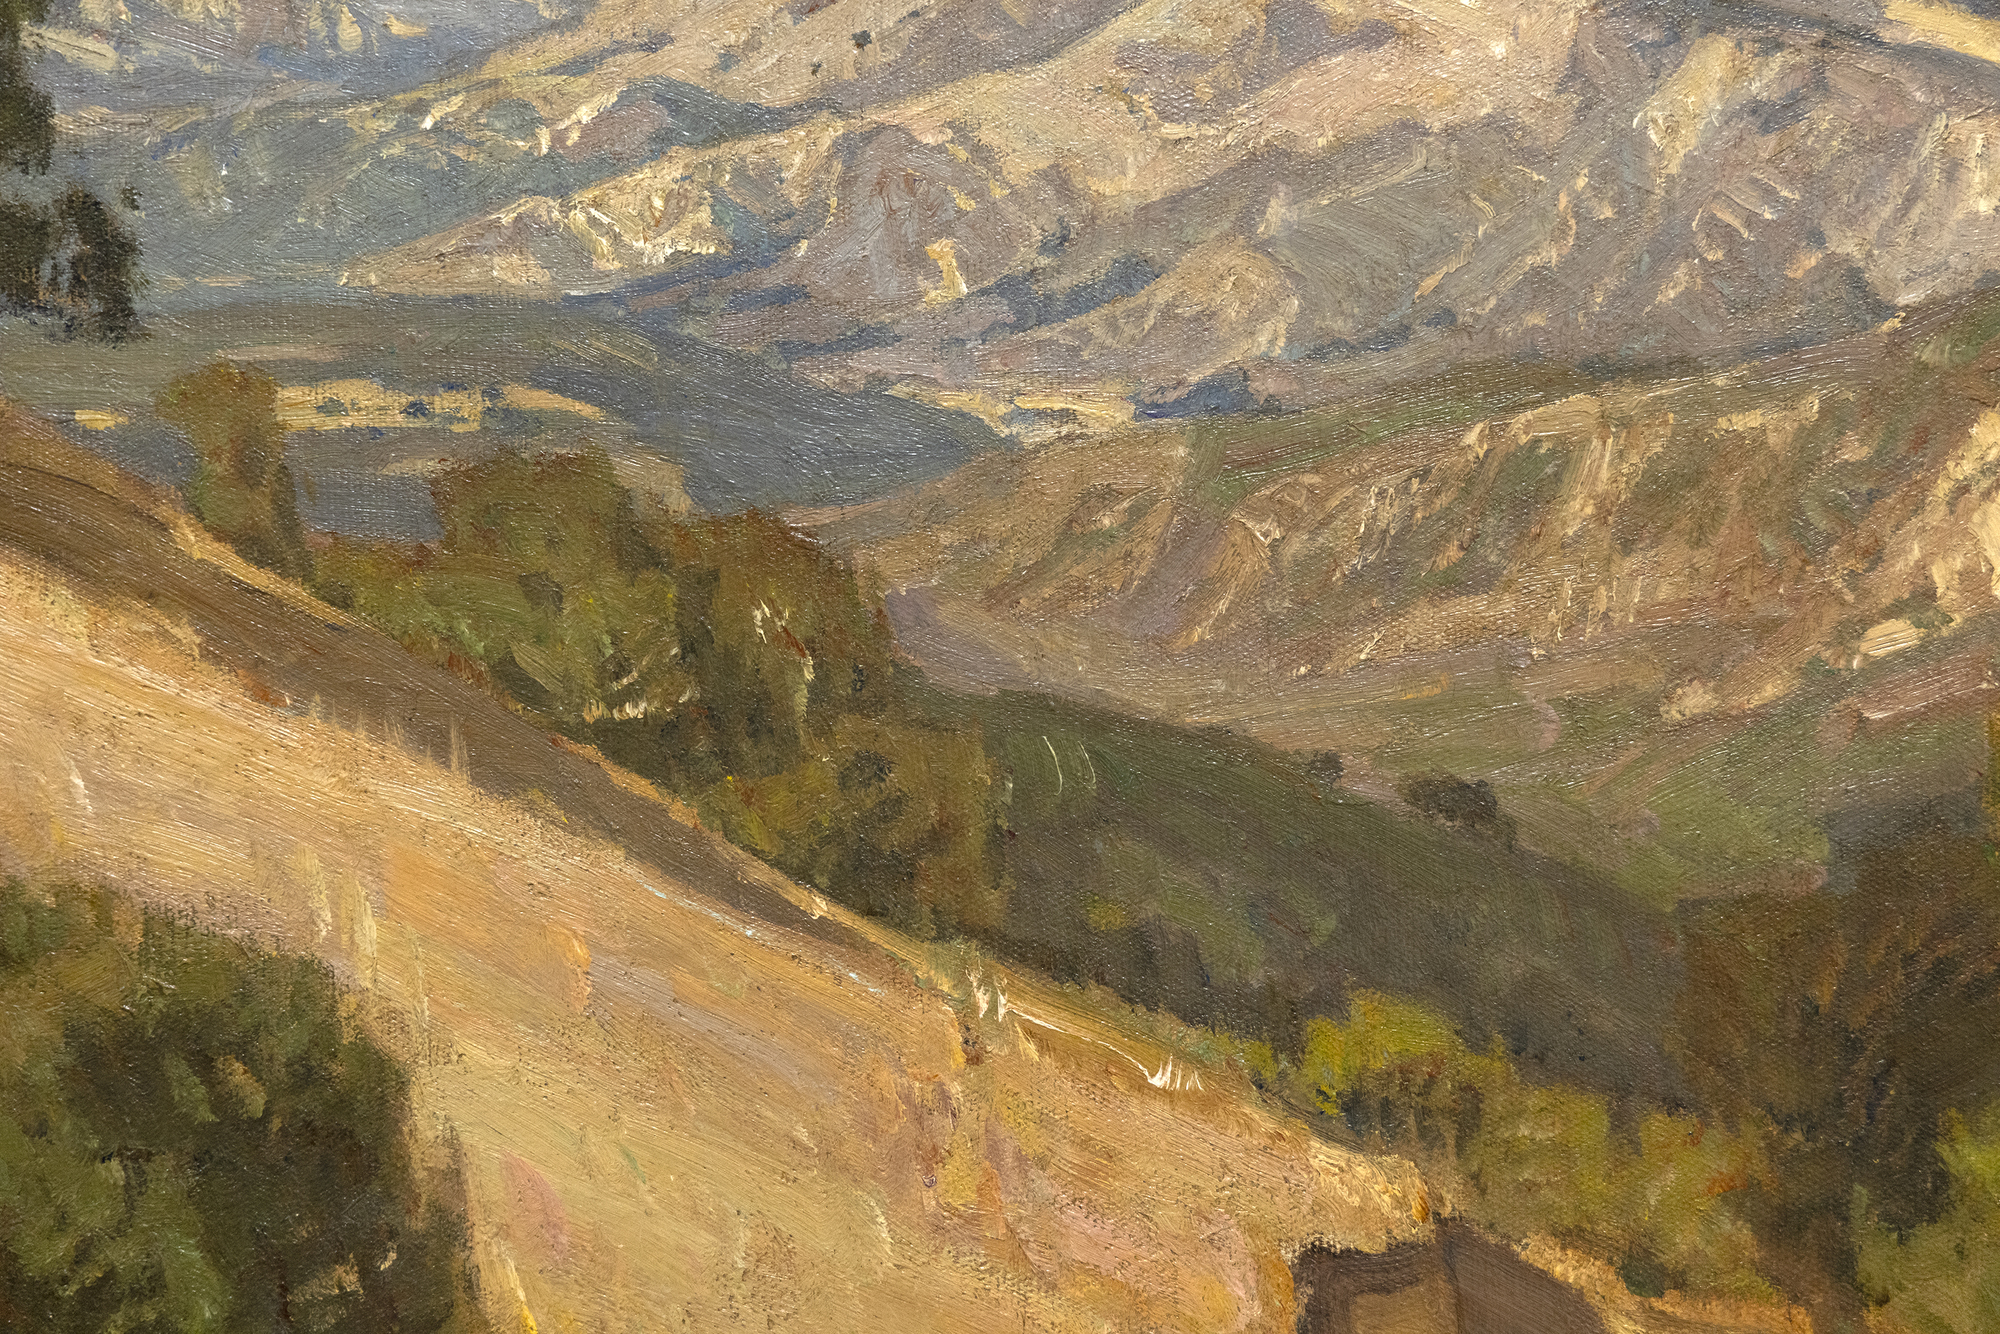 WILLIAM WENDT - California Landscape - oil on canvas - 23 1/2 x 31 3/4 in.